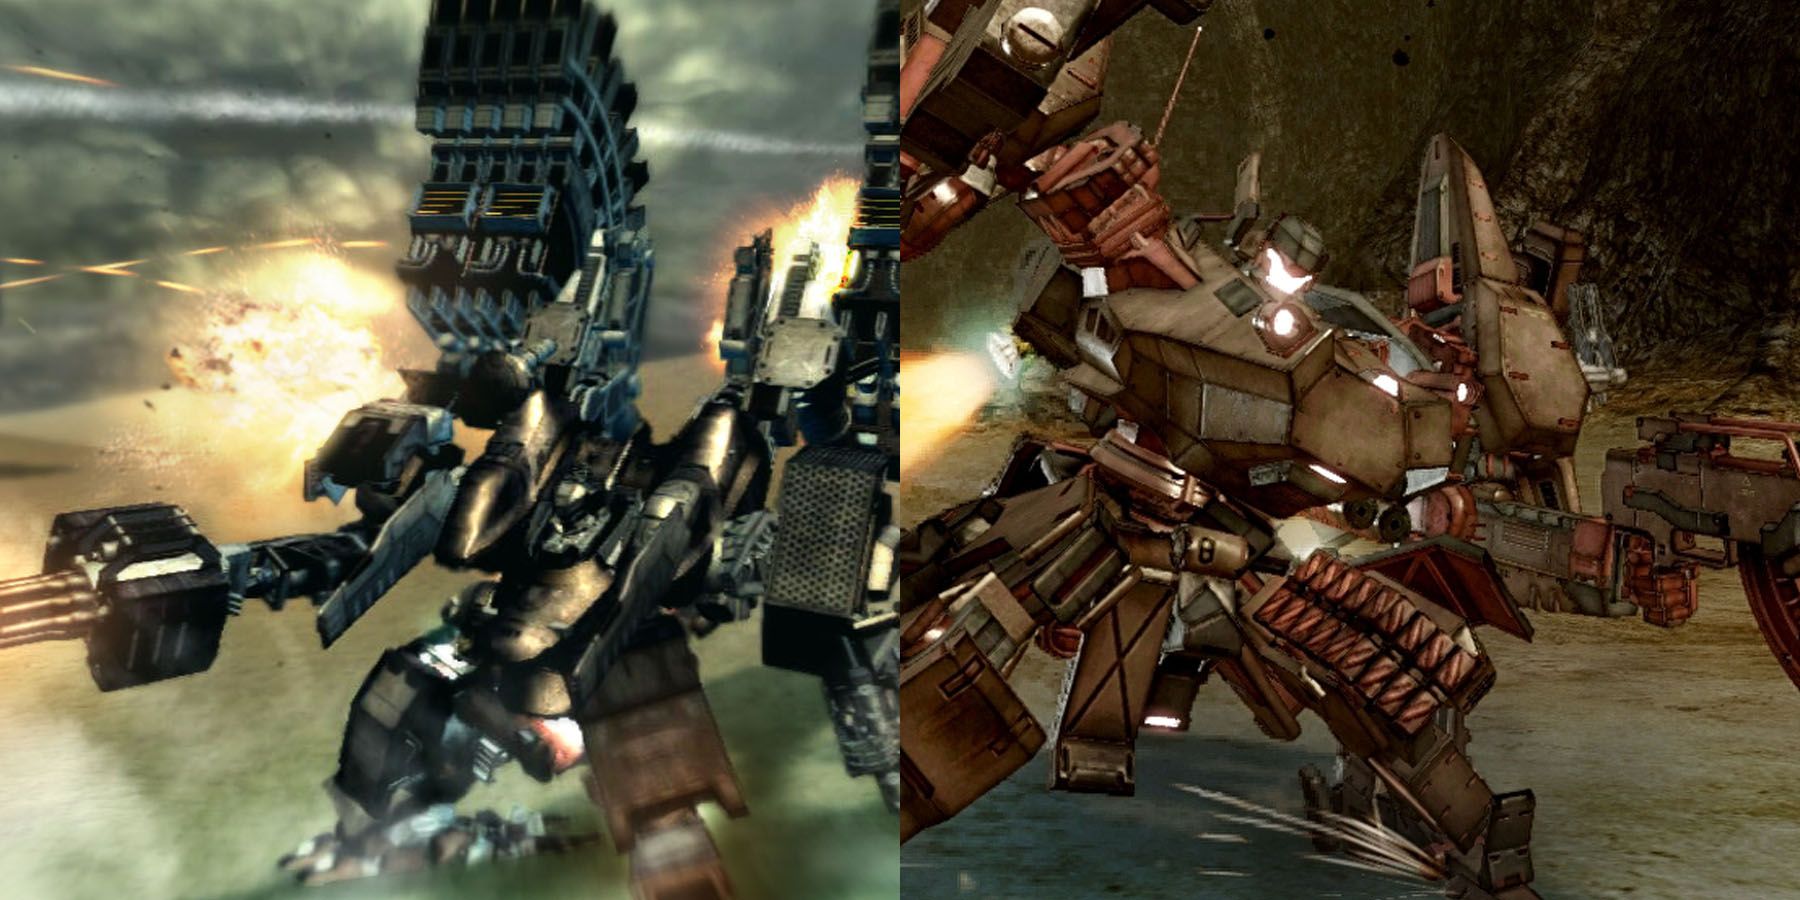 https://static0.gamerantimages.com/wordpress/wp-content/uploads/2022/02/Armored-Core---Things-Players-Need-To-Know-About-The-Mecha-Series.jpg